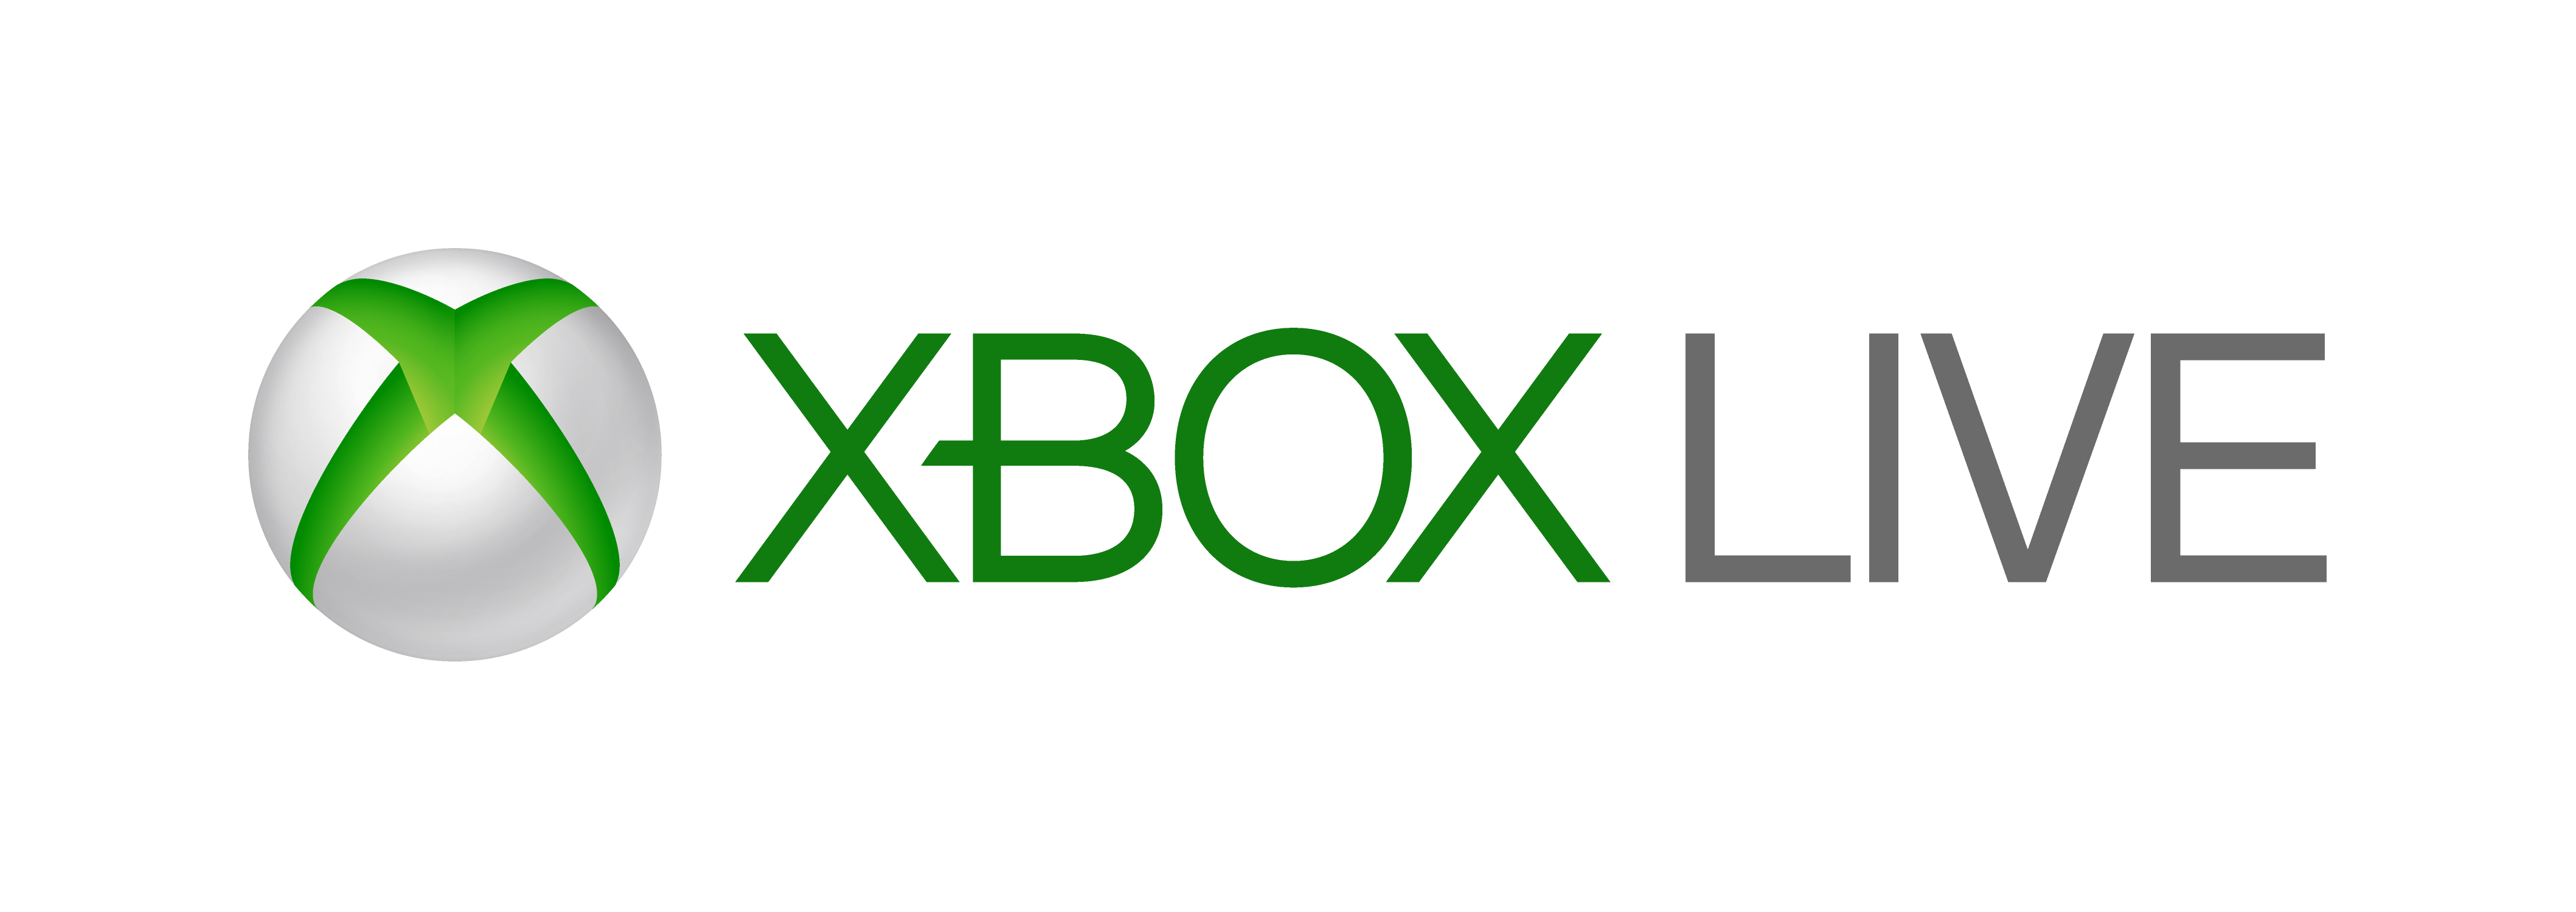 microsoft xbox one console with kinect black png 4235x150!   0 name generator generators xbox gamertag girl - instagram nam!   e generator instagenerator online